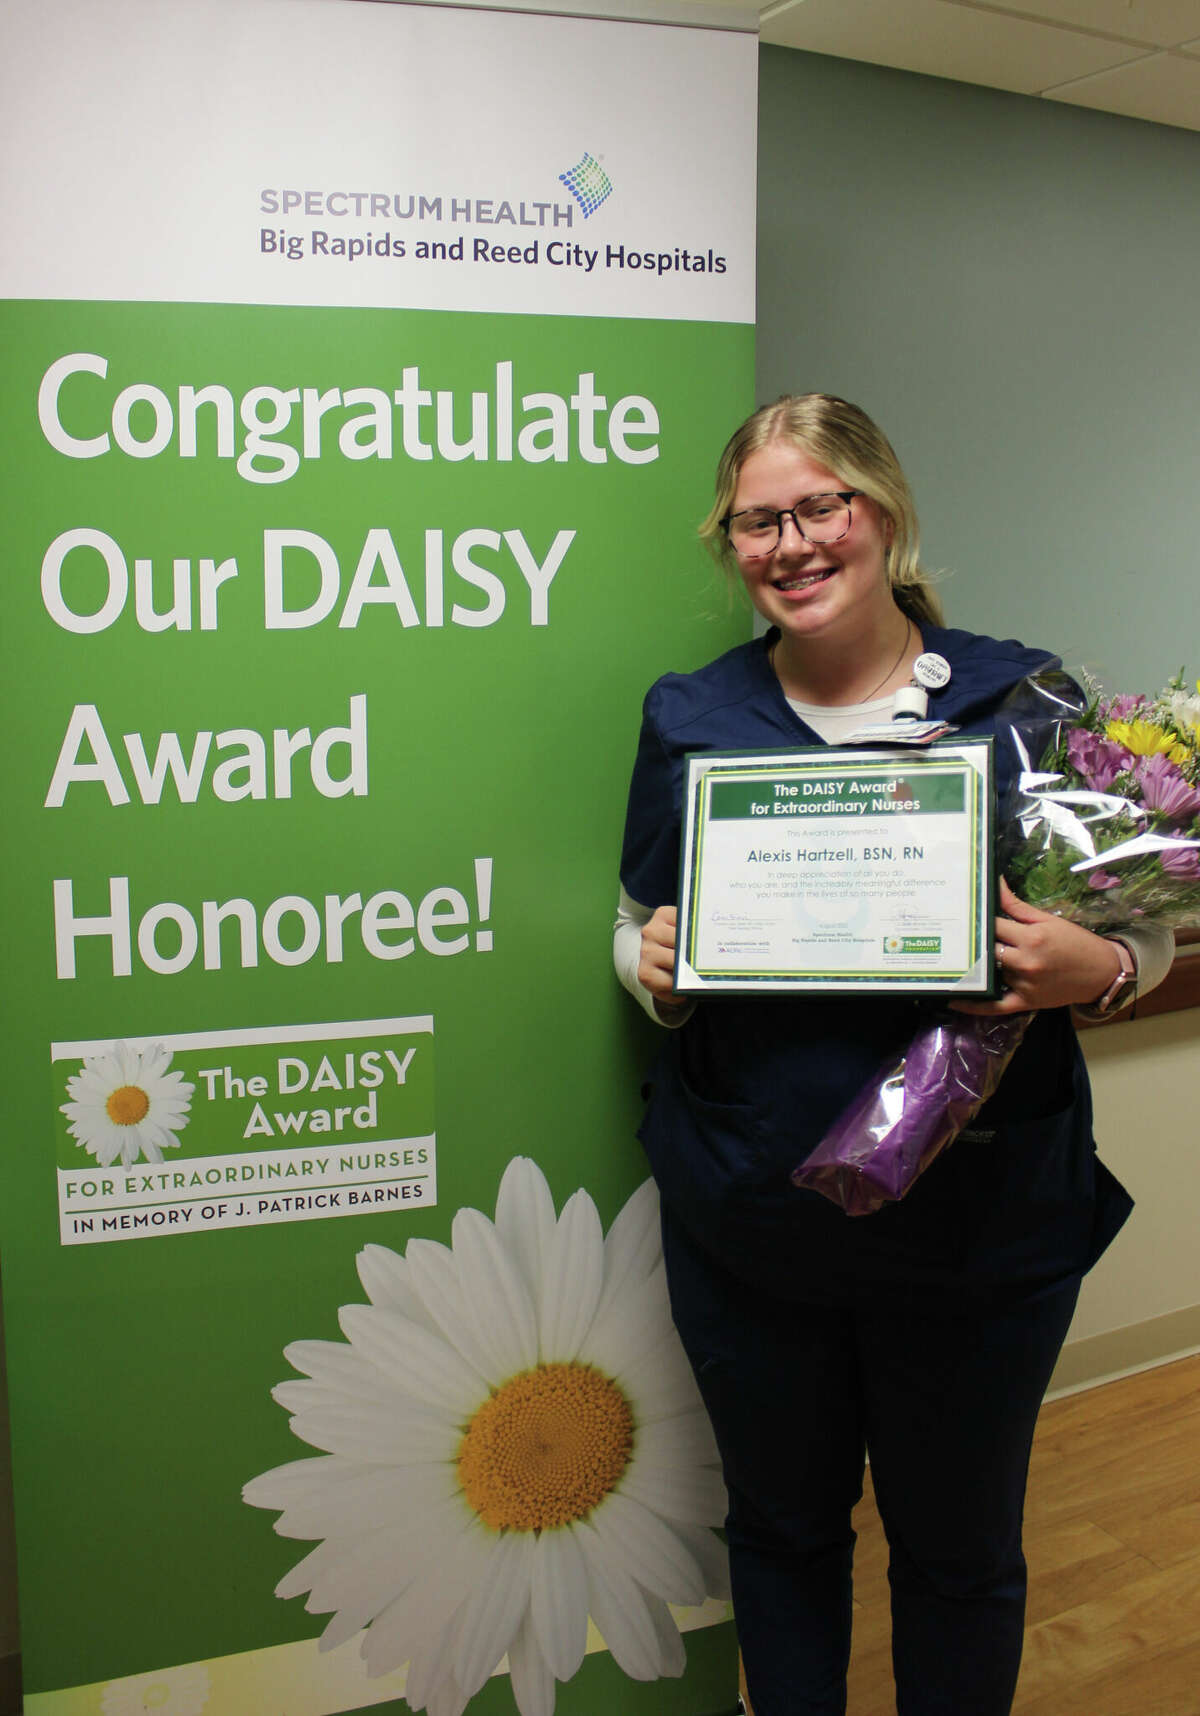 Alexis Hartzell, RN, was given a DAISY Award for the recent care she provided a patient in the intensive care unit at Big Rapids Hospital.